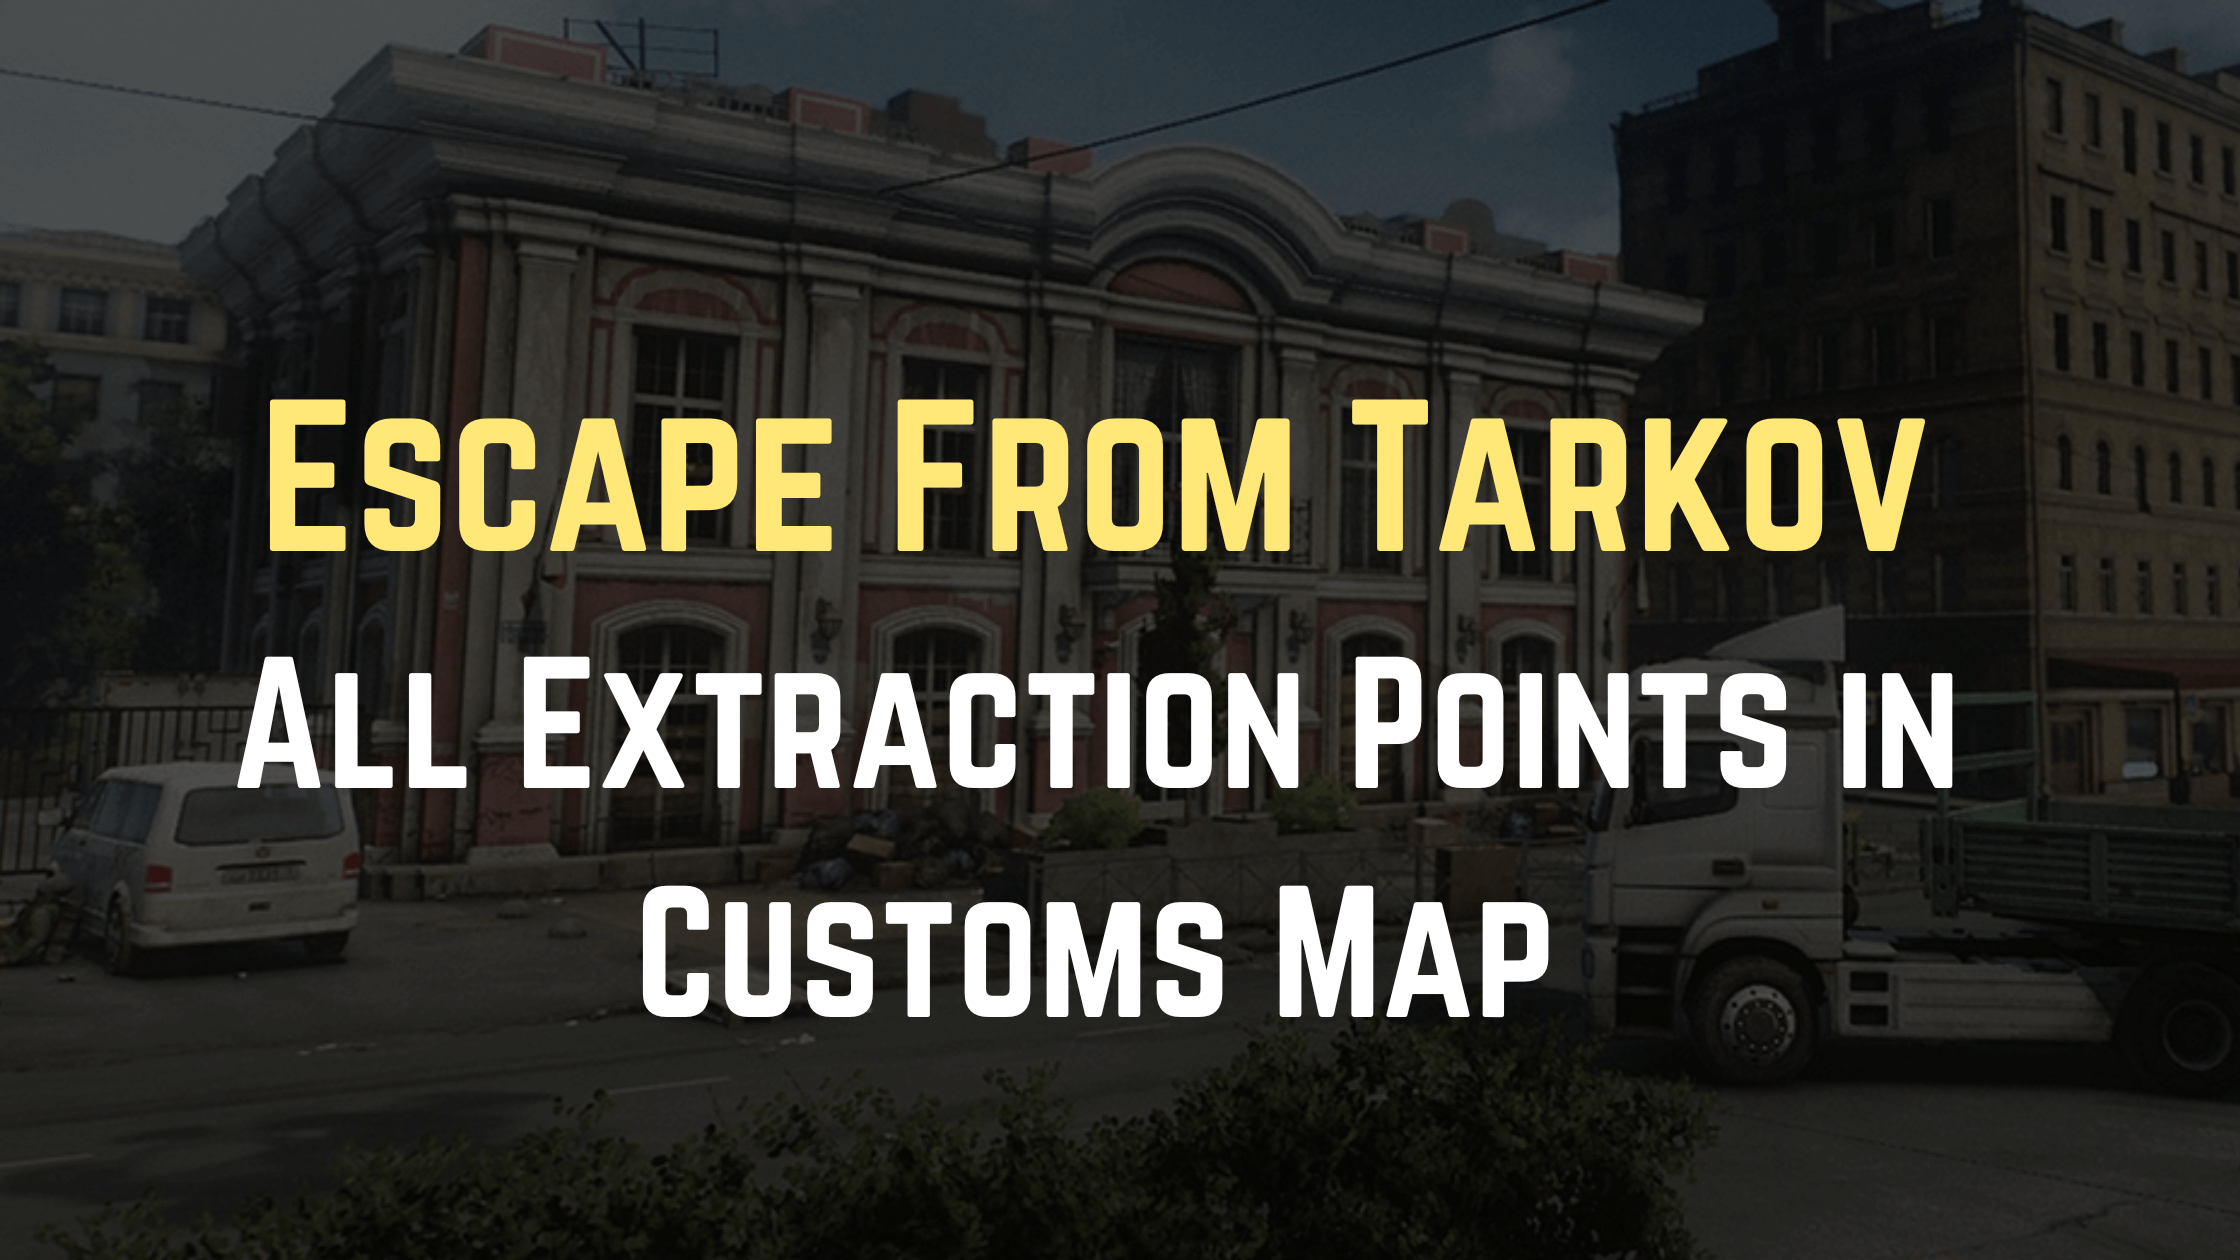 All Extraction Points in Customs Map